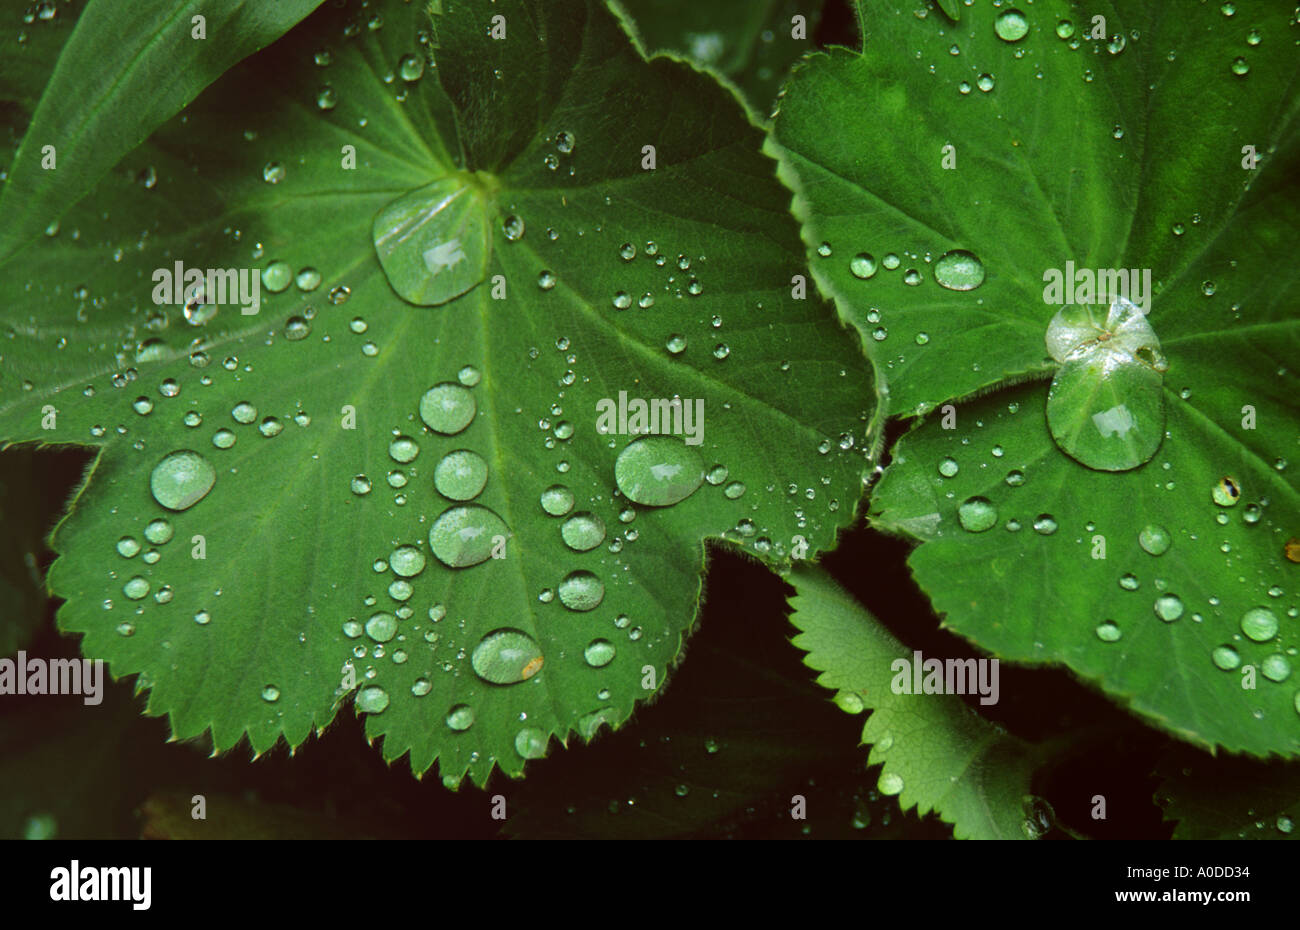 Lady's mantle with water drops Stock Photo